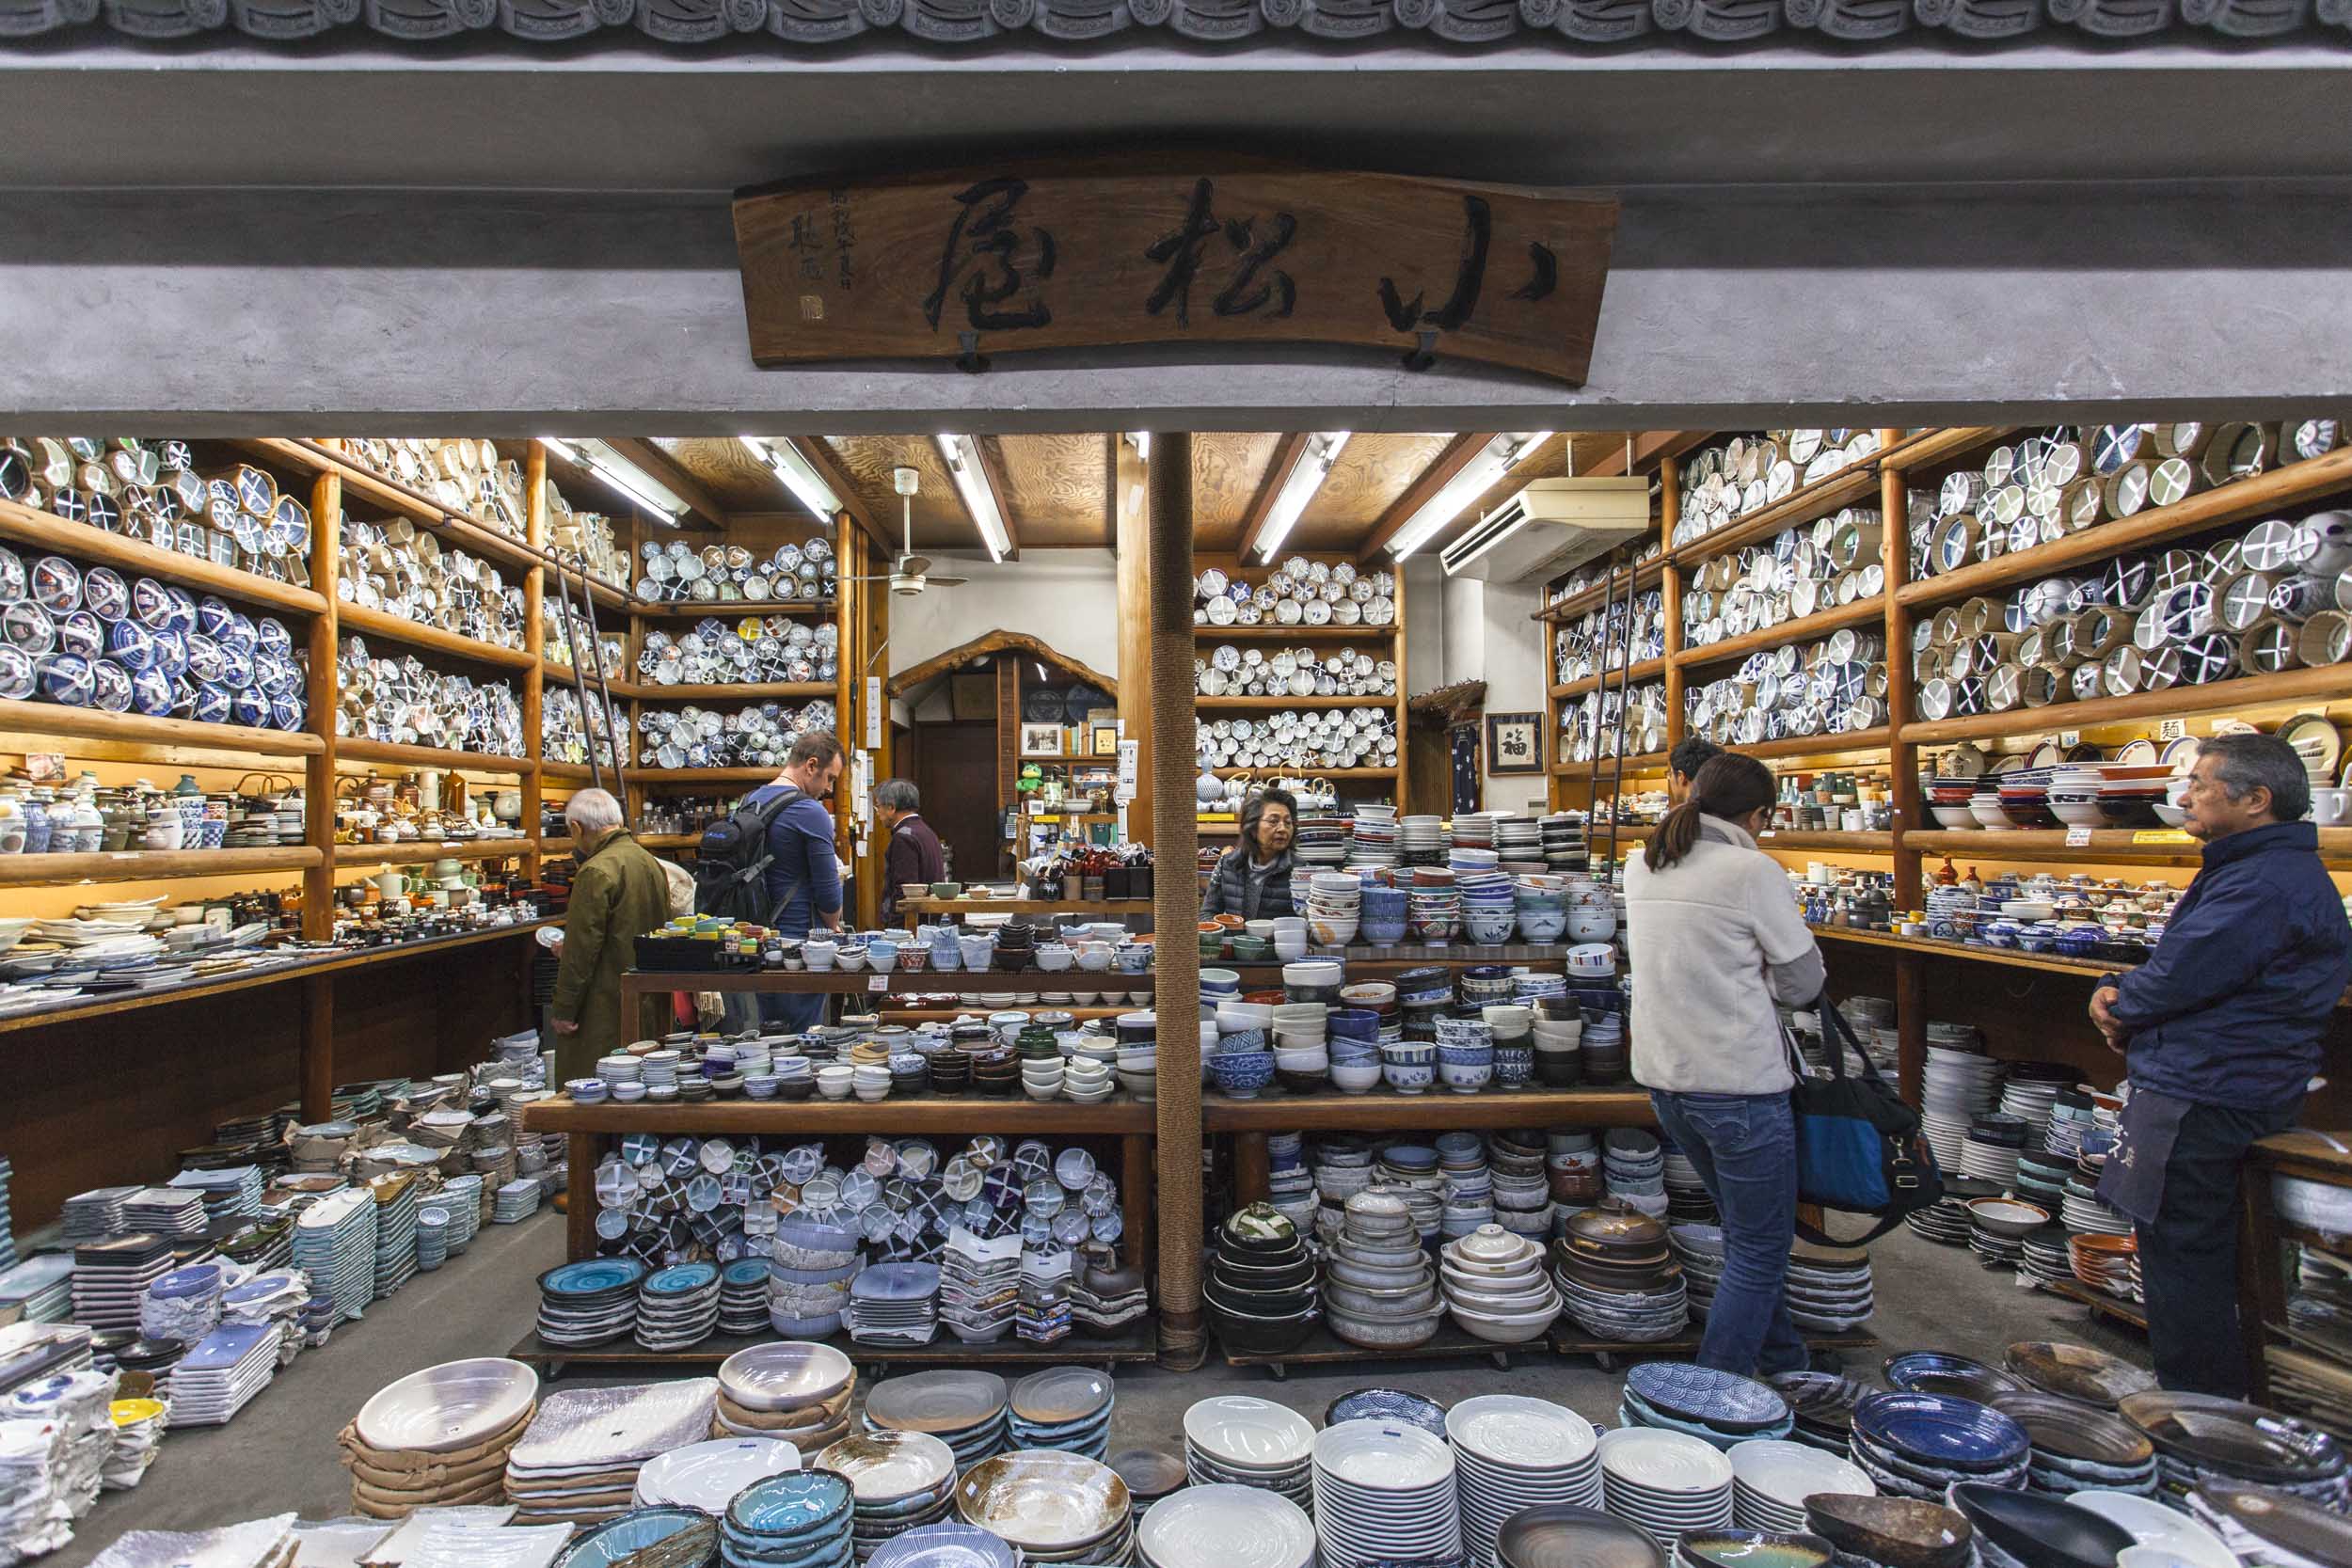 Top 10 cookware stores in Kappabashi Kitchen Town - Ninja Food Tours